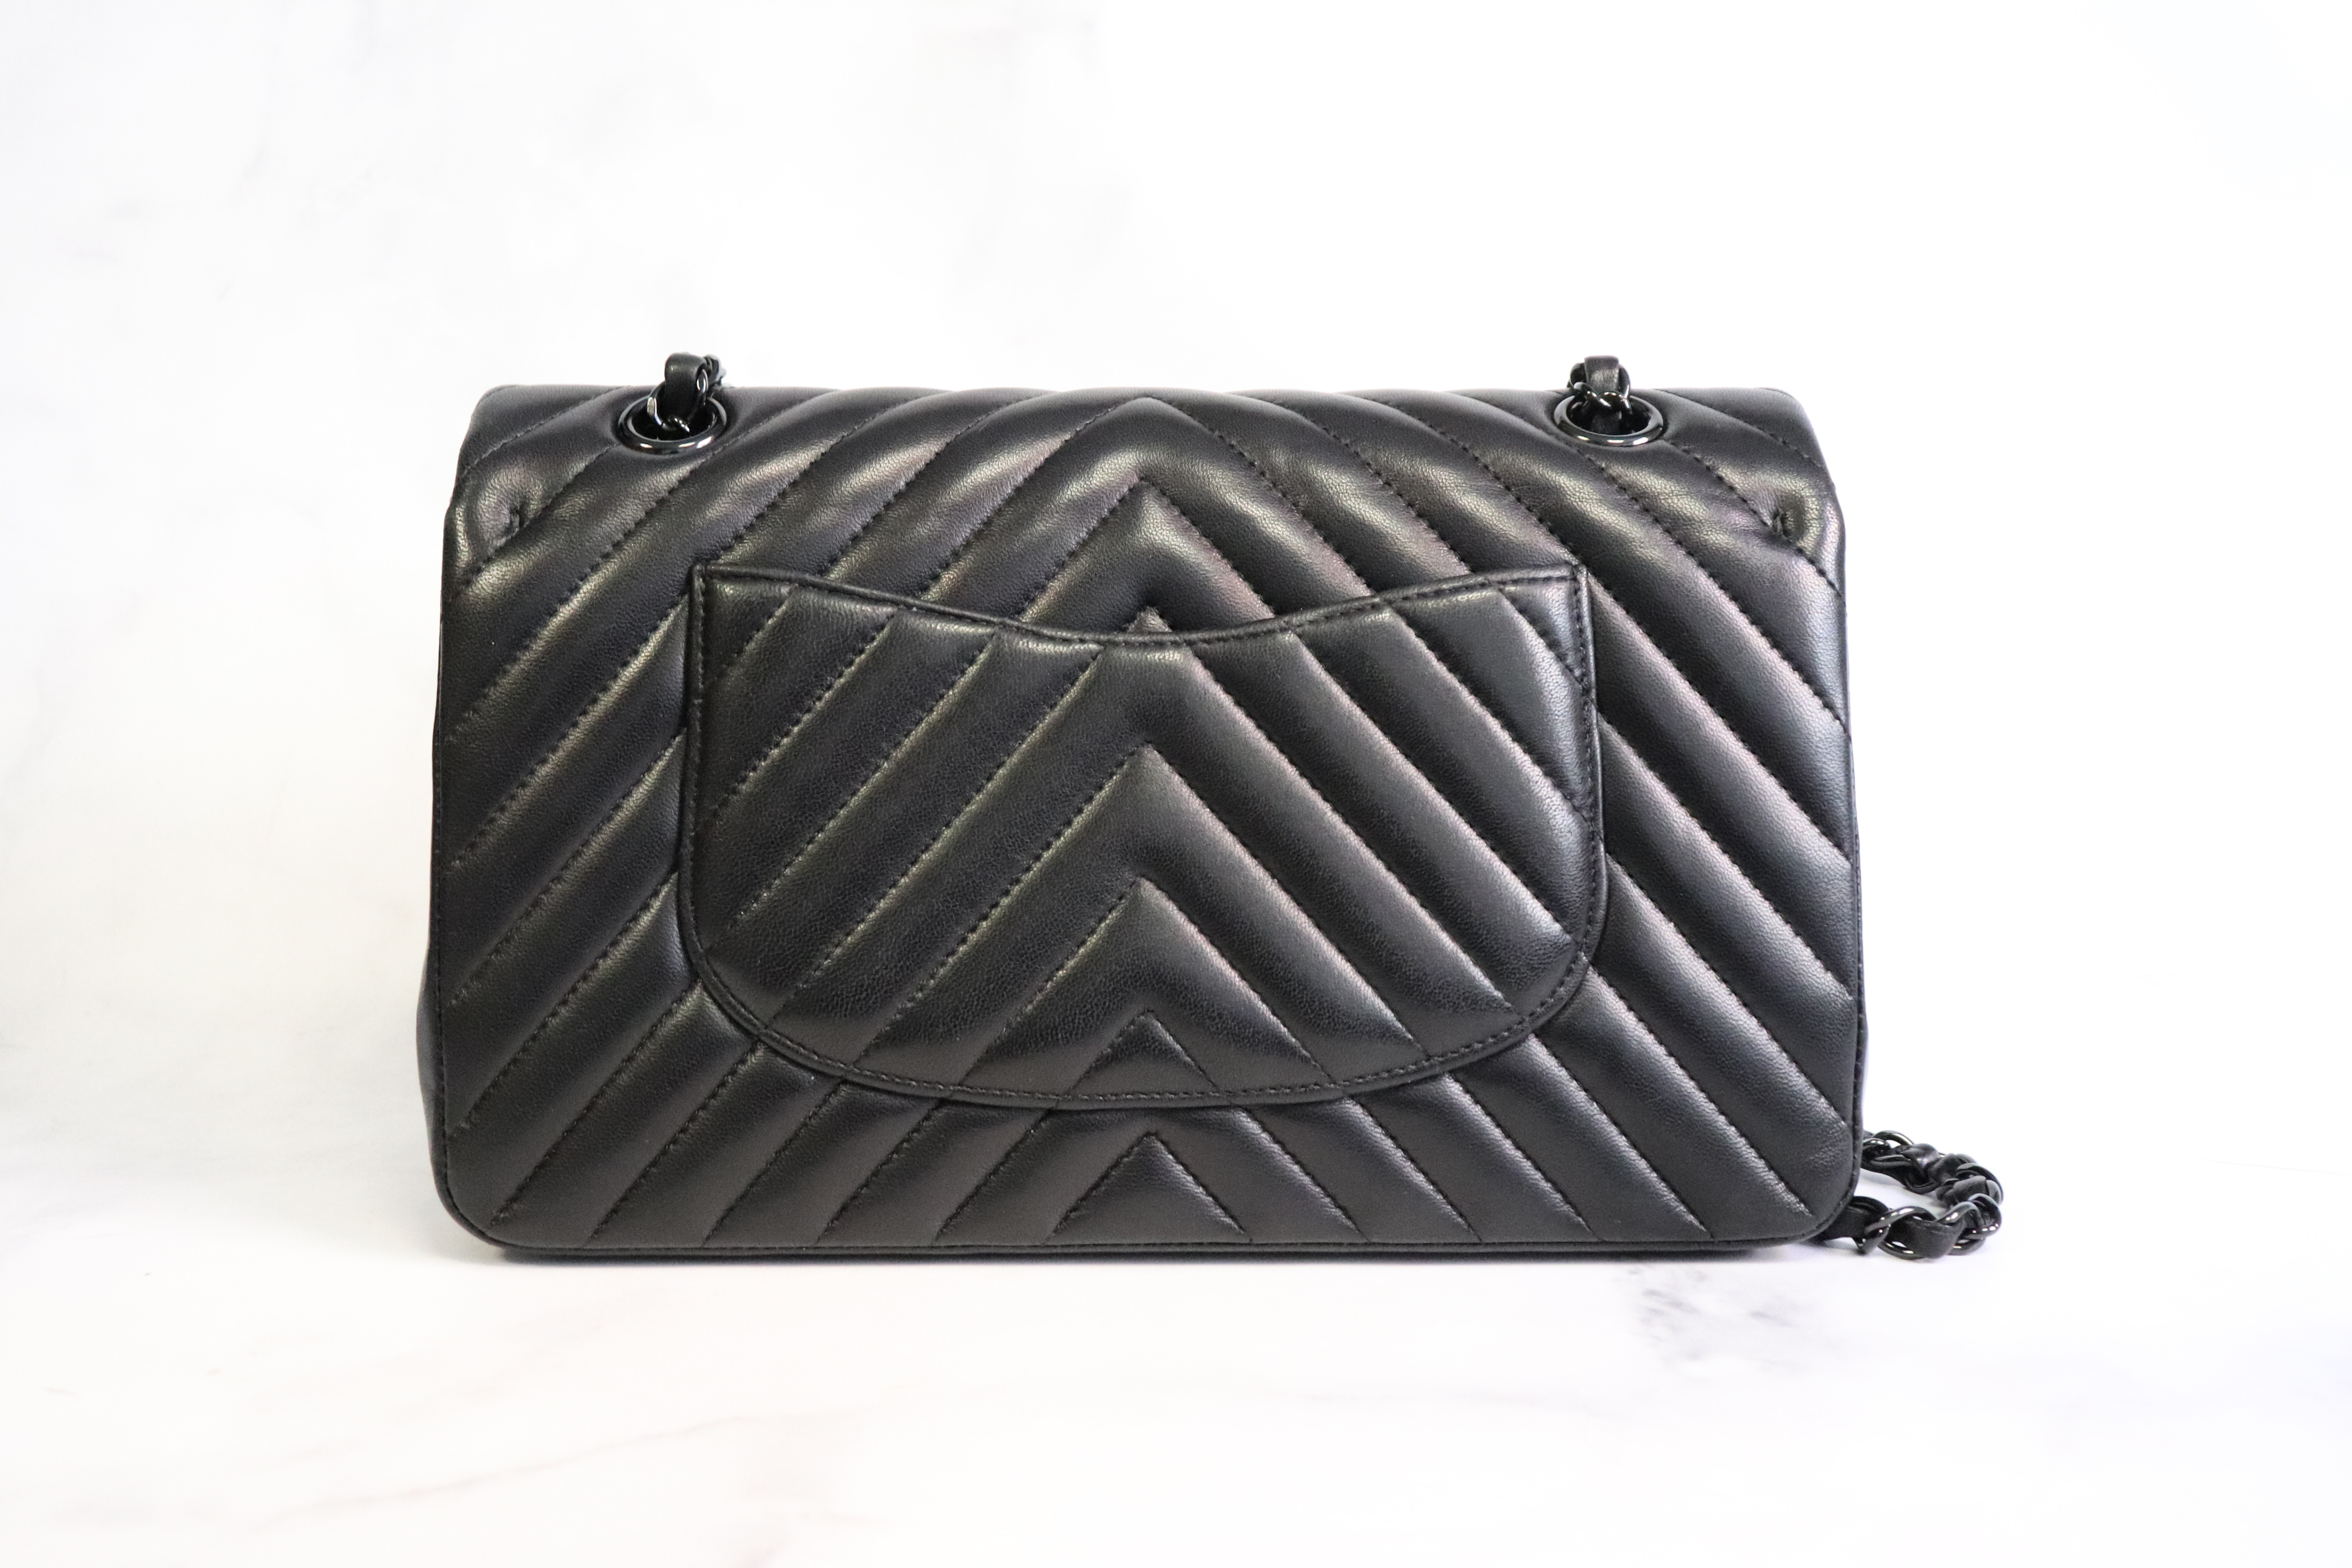 Chanel Classic Medium Double Flap, Black Lambskin Chevron Leather, So Black  Hardware, Preowned in Dustbag